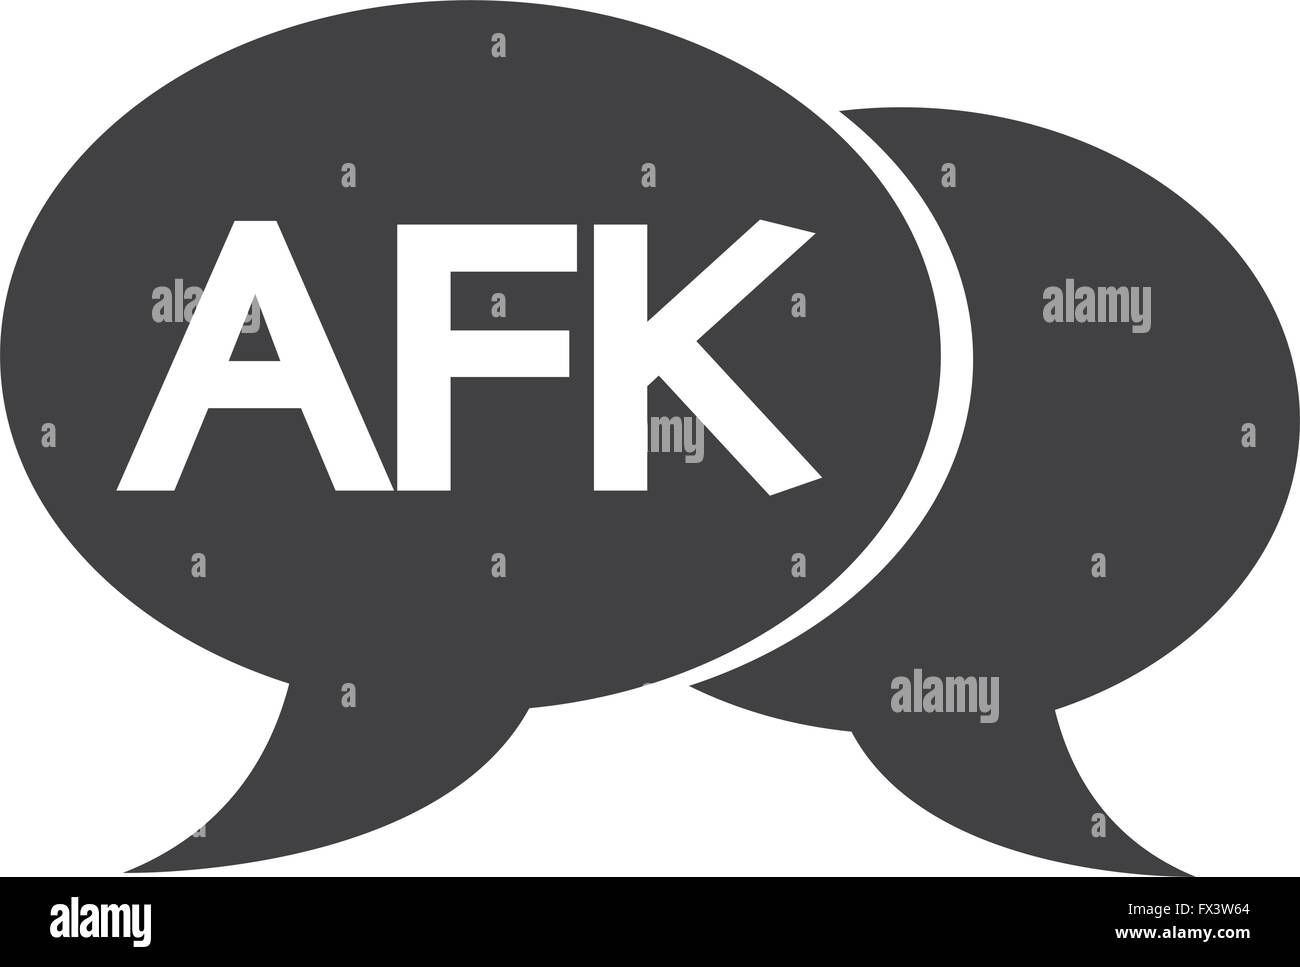 AFK internet acronym chat bubble illustration Stock Vector